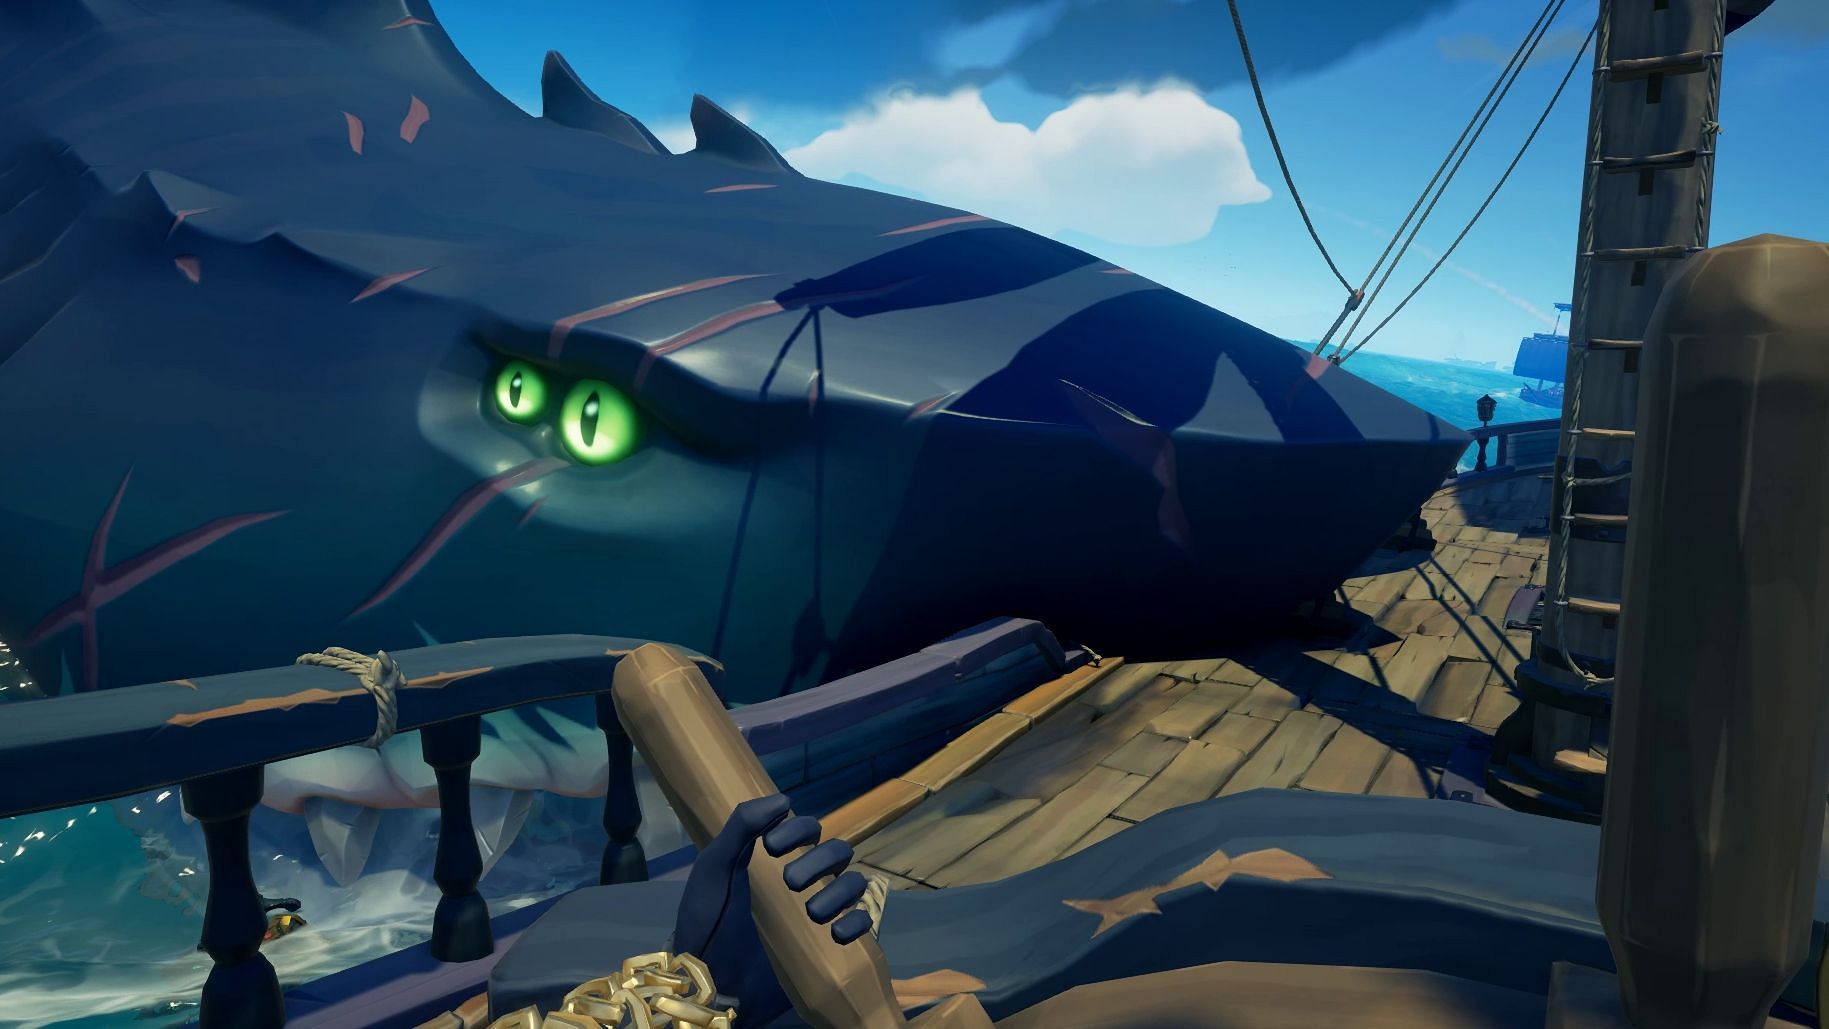 The Megalodon is an ultimate test of a Sea of Thieves player